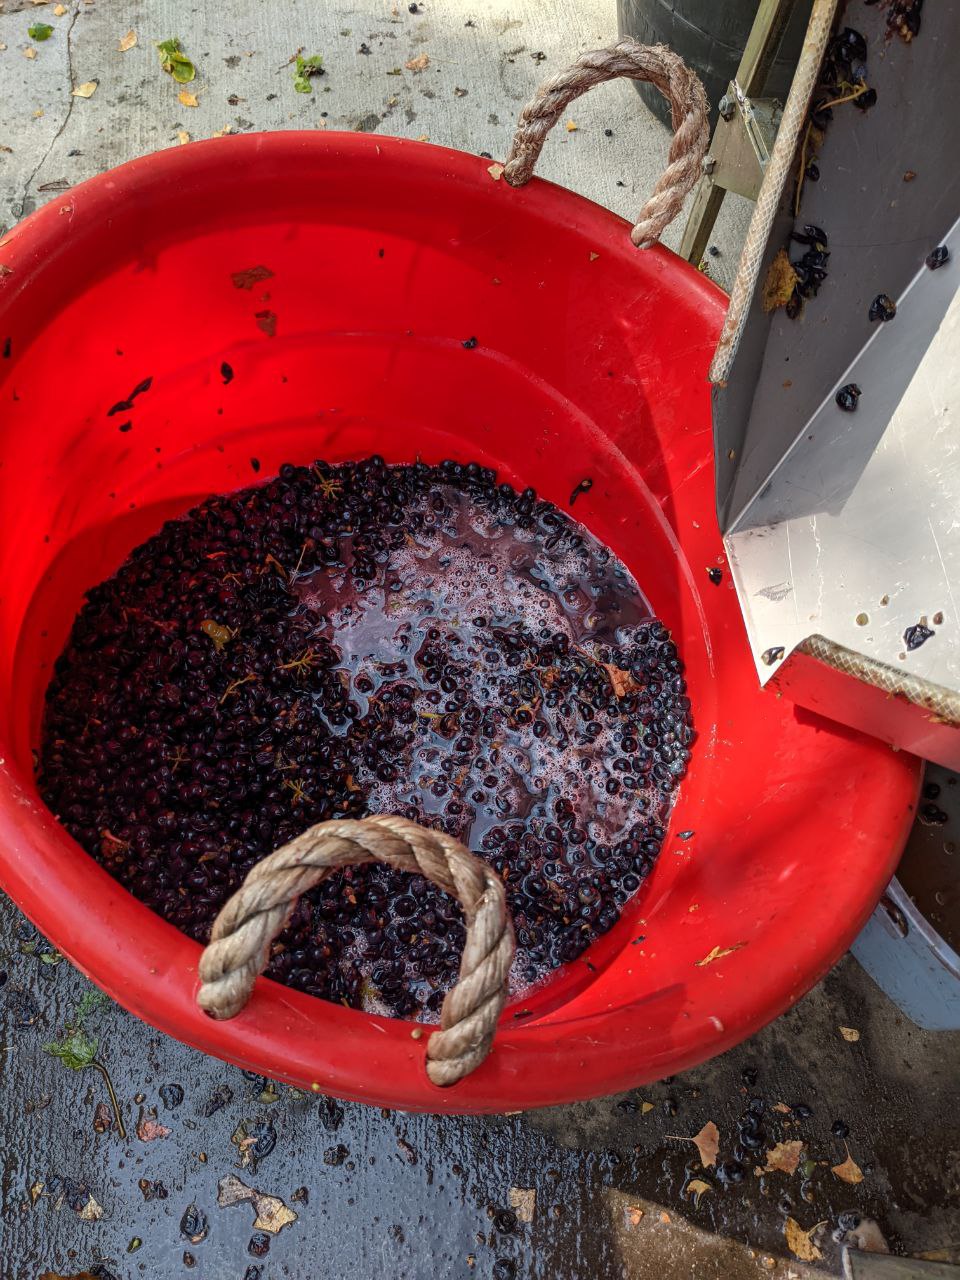 an image of crushed grapes